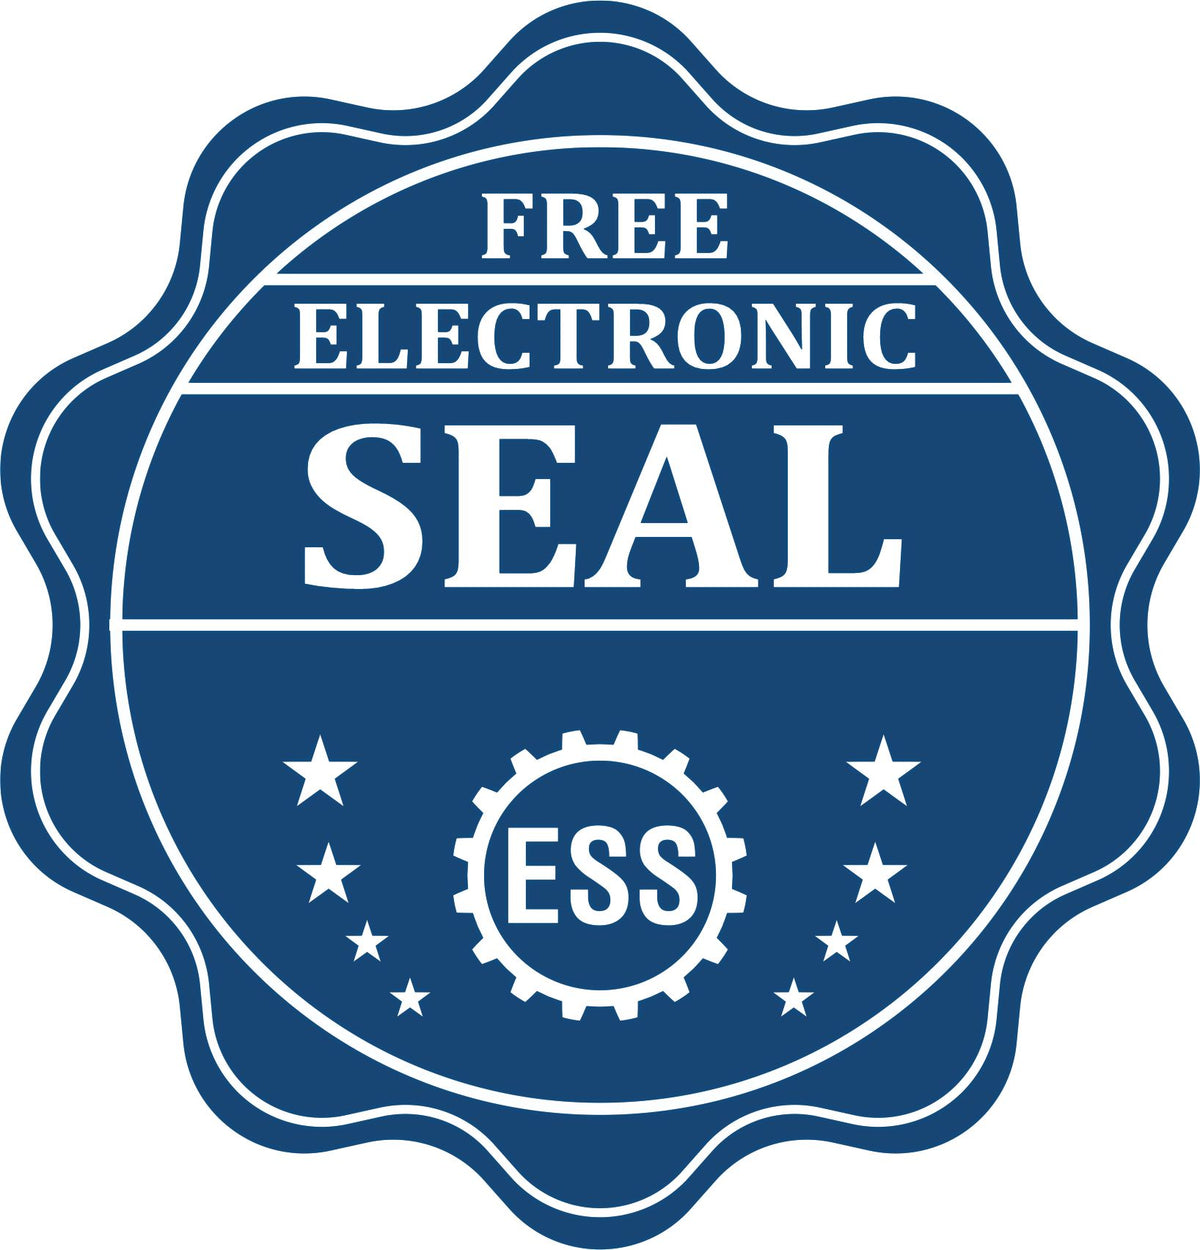 A badge showing a free electronic seal for the Hybrid Georgia Land Surveyor Seal with stars and the ESS gear on the emblem.